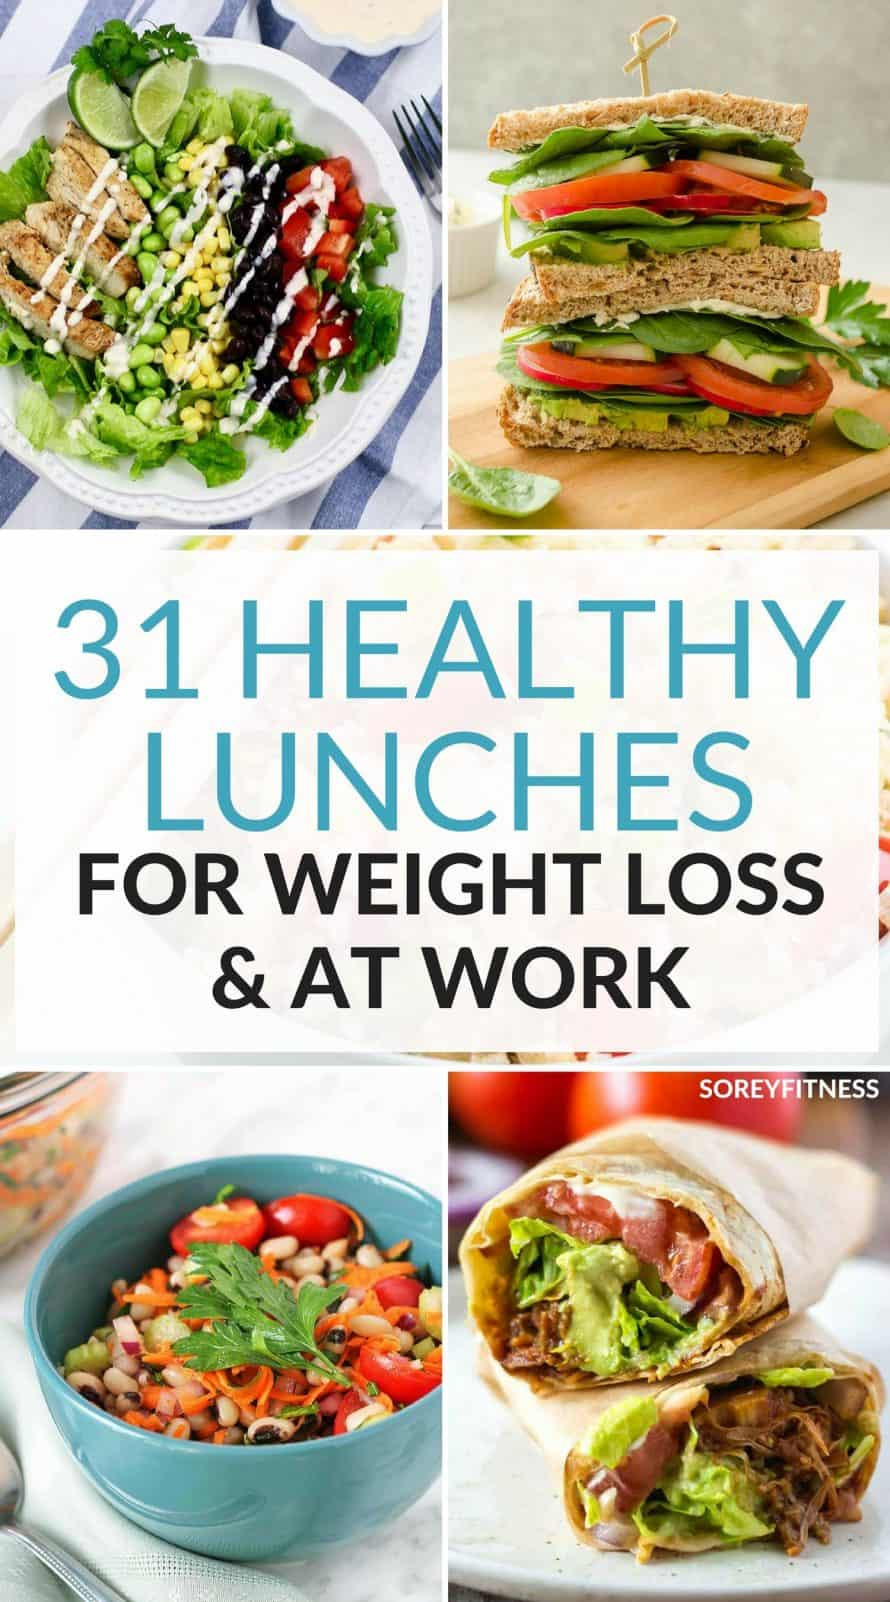 Healthy Lunches For Weight Loss
 31 Healthy Lunch Ideas For Weight Loss Easy Meals for